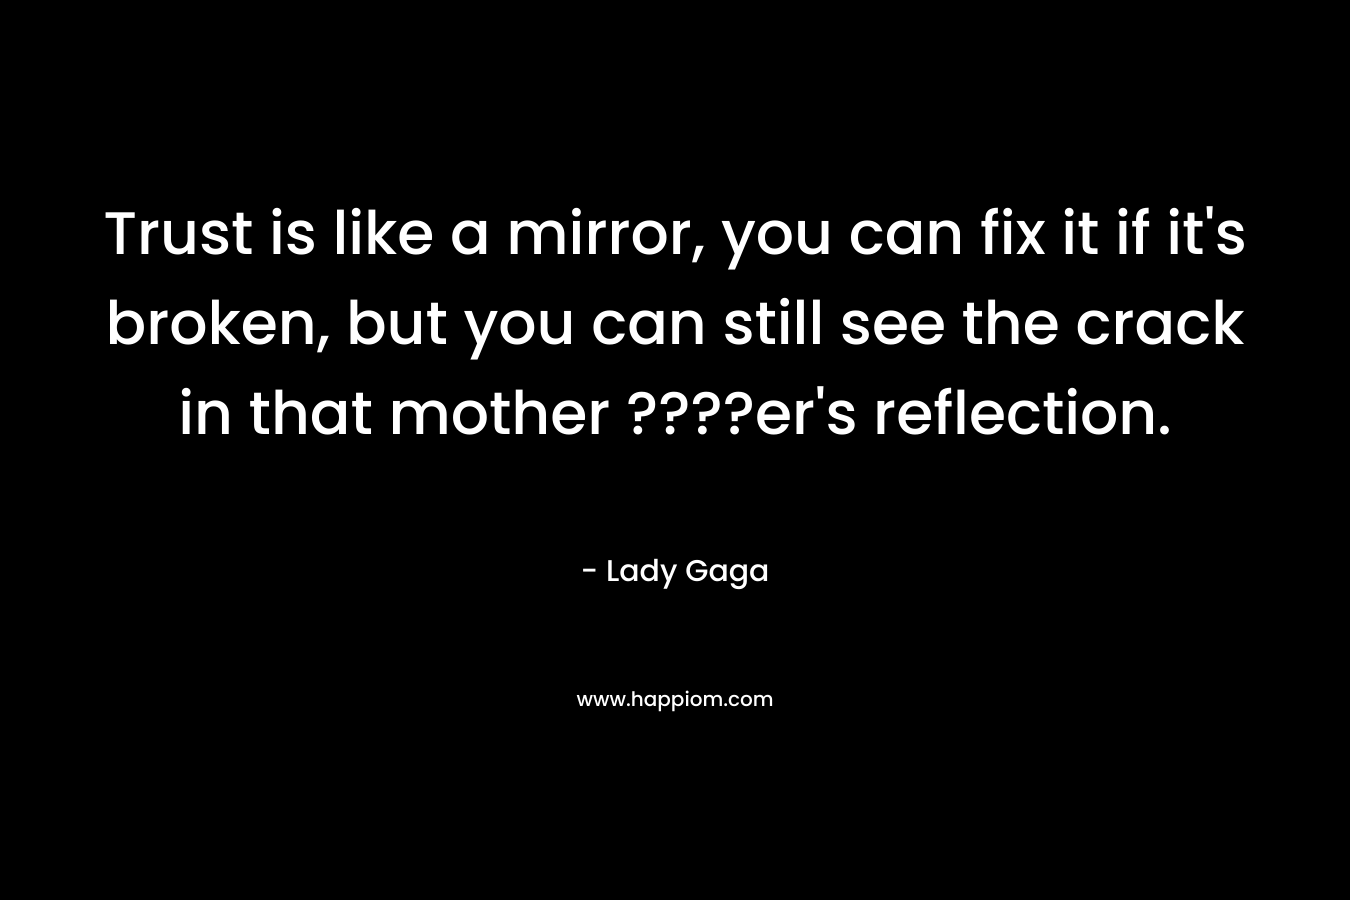 Trust is like a mirror, you can fix it if it’s broken, but you can still see the crack in that mother ????er’s reflection. – Lady Gaga